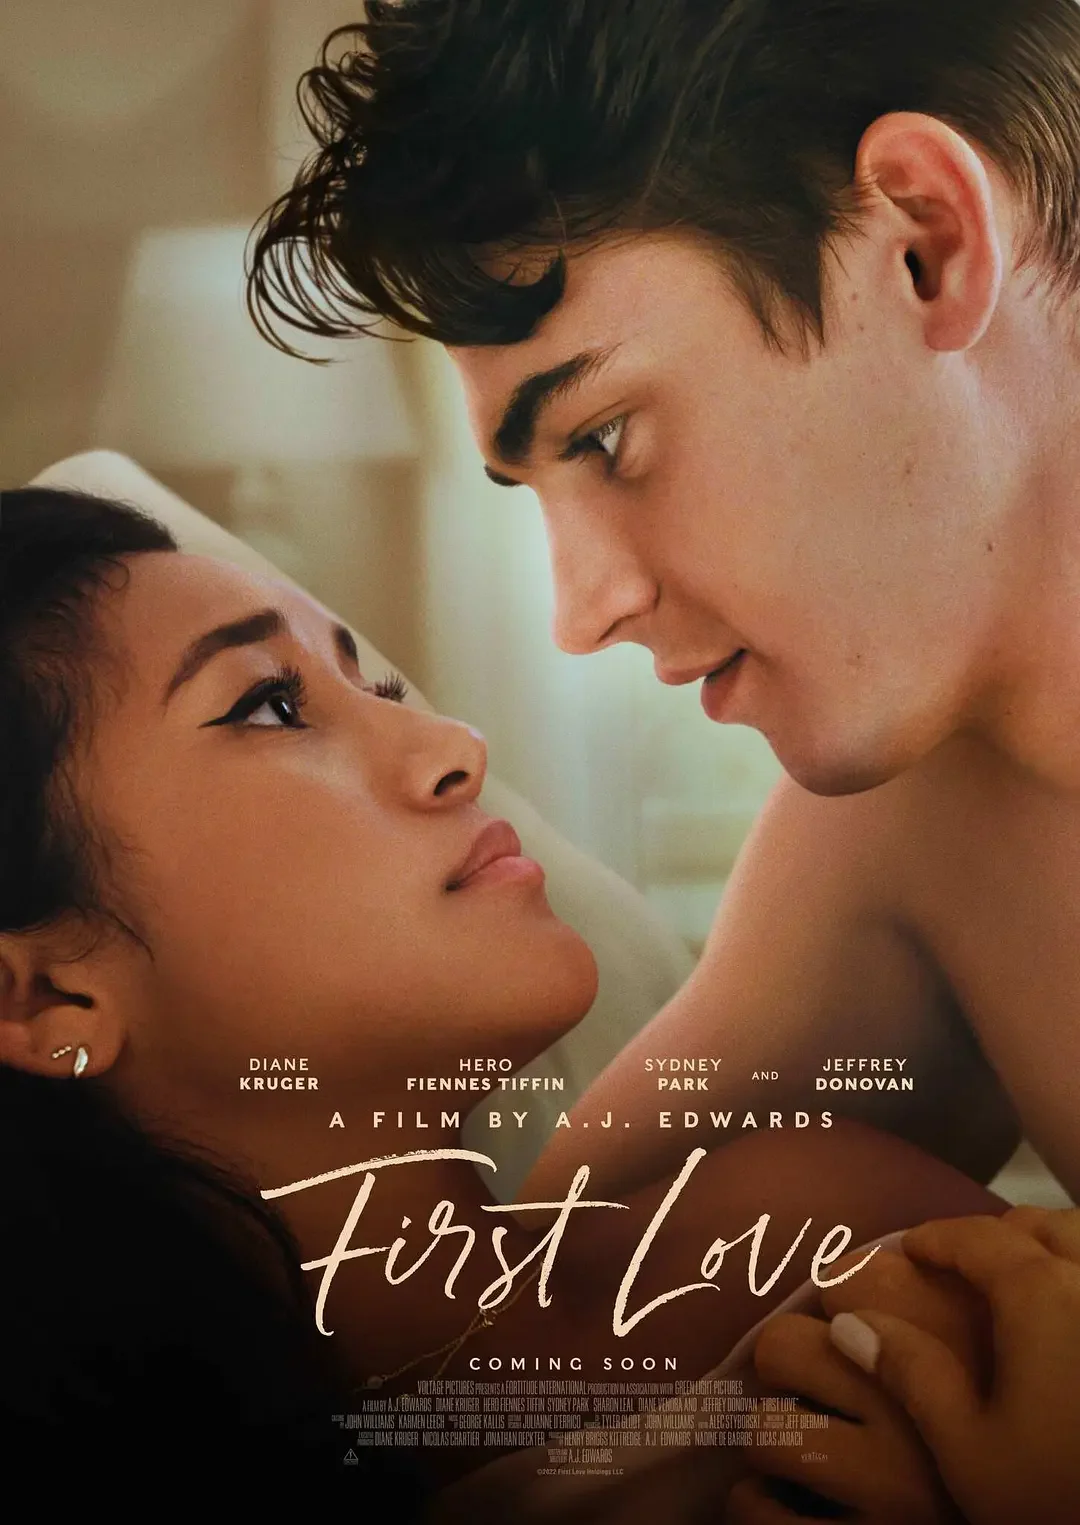 "First Love" Starring Hero Fiennes Tiffin and Diane Kruger Releases Official Trailer